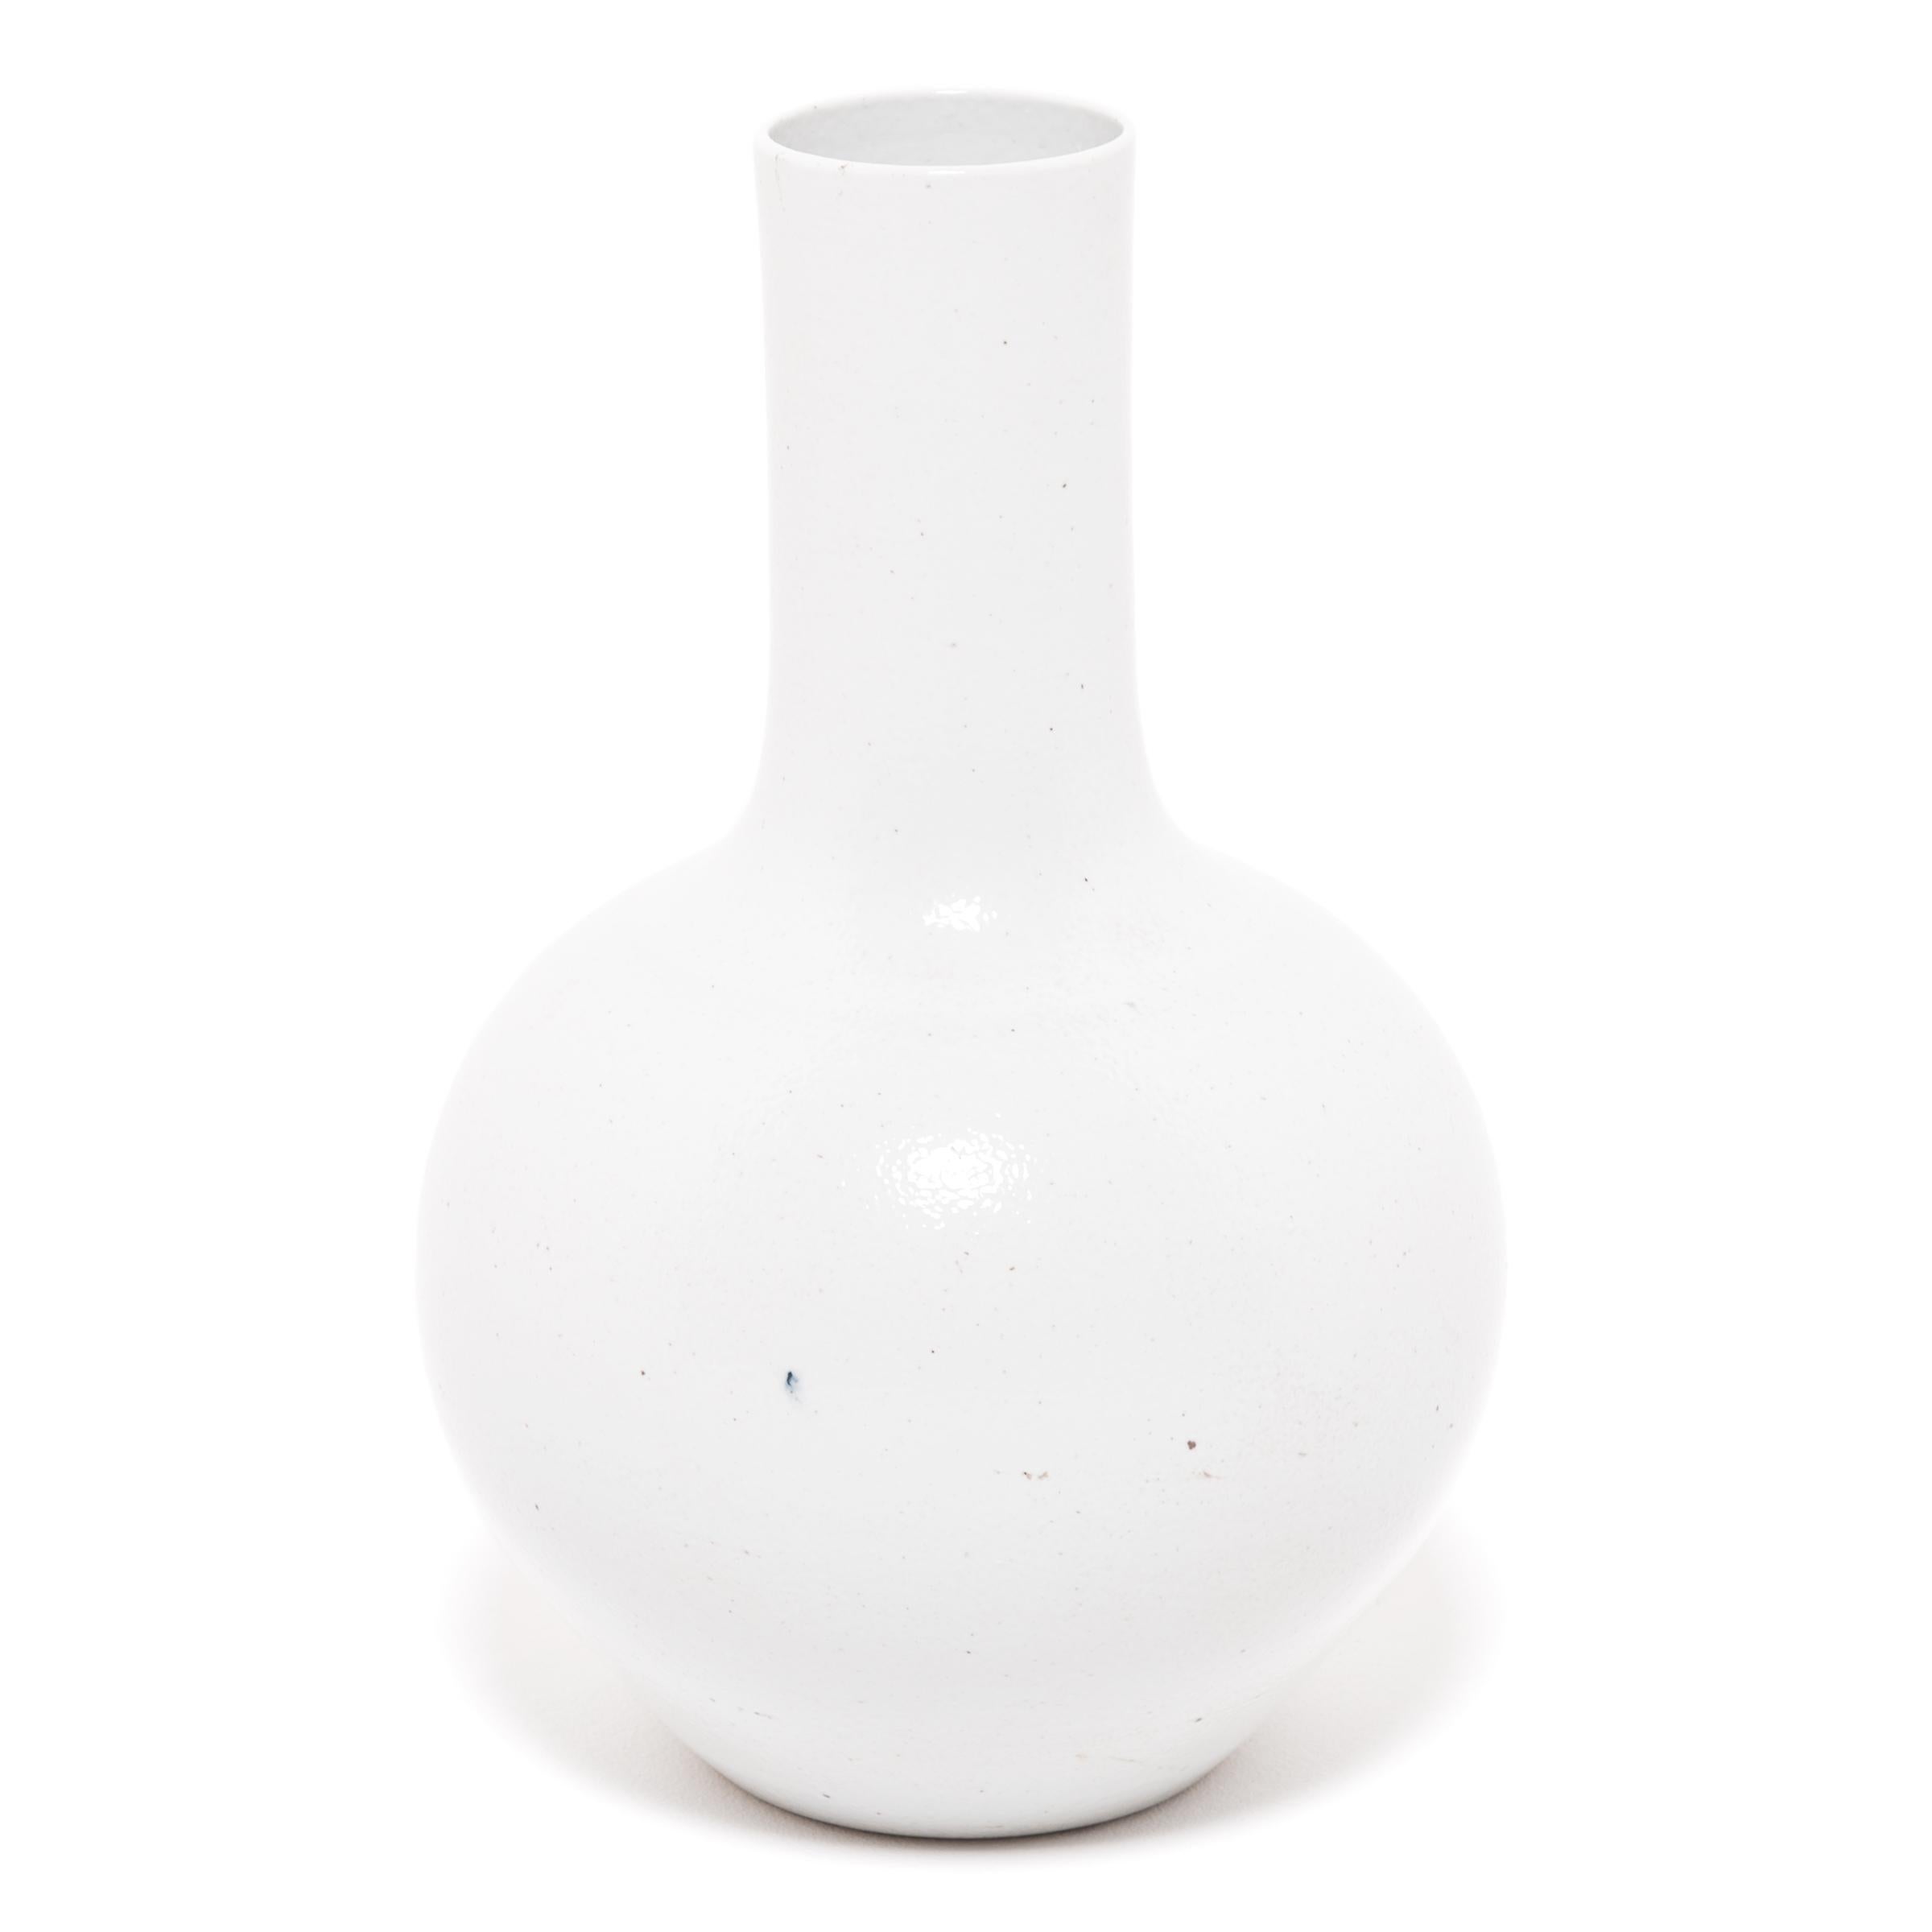 Drawing on a long Chinese tradition of ceramics, this striking long-necked vase is cloaked in an all-over milky white glaze. Sculpted by artisans in China's Zhejiang province, the large vase reinterprets a traditional gooseneck shape known as a